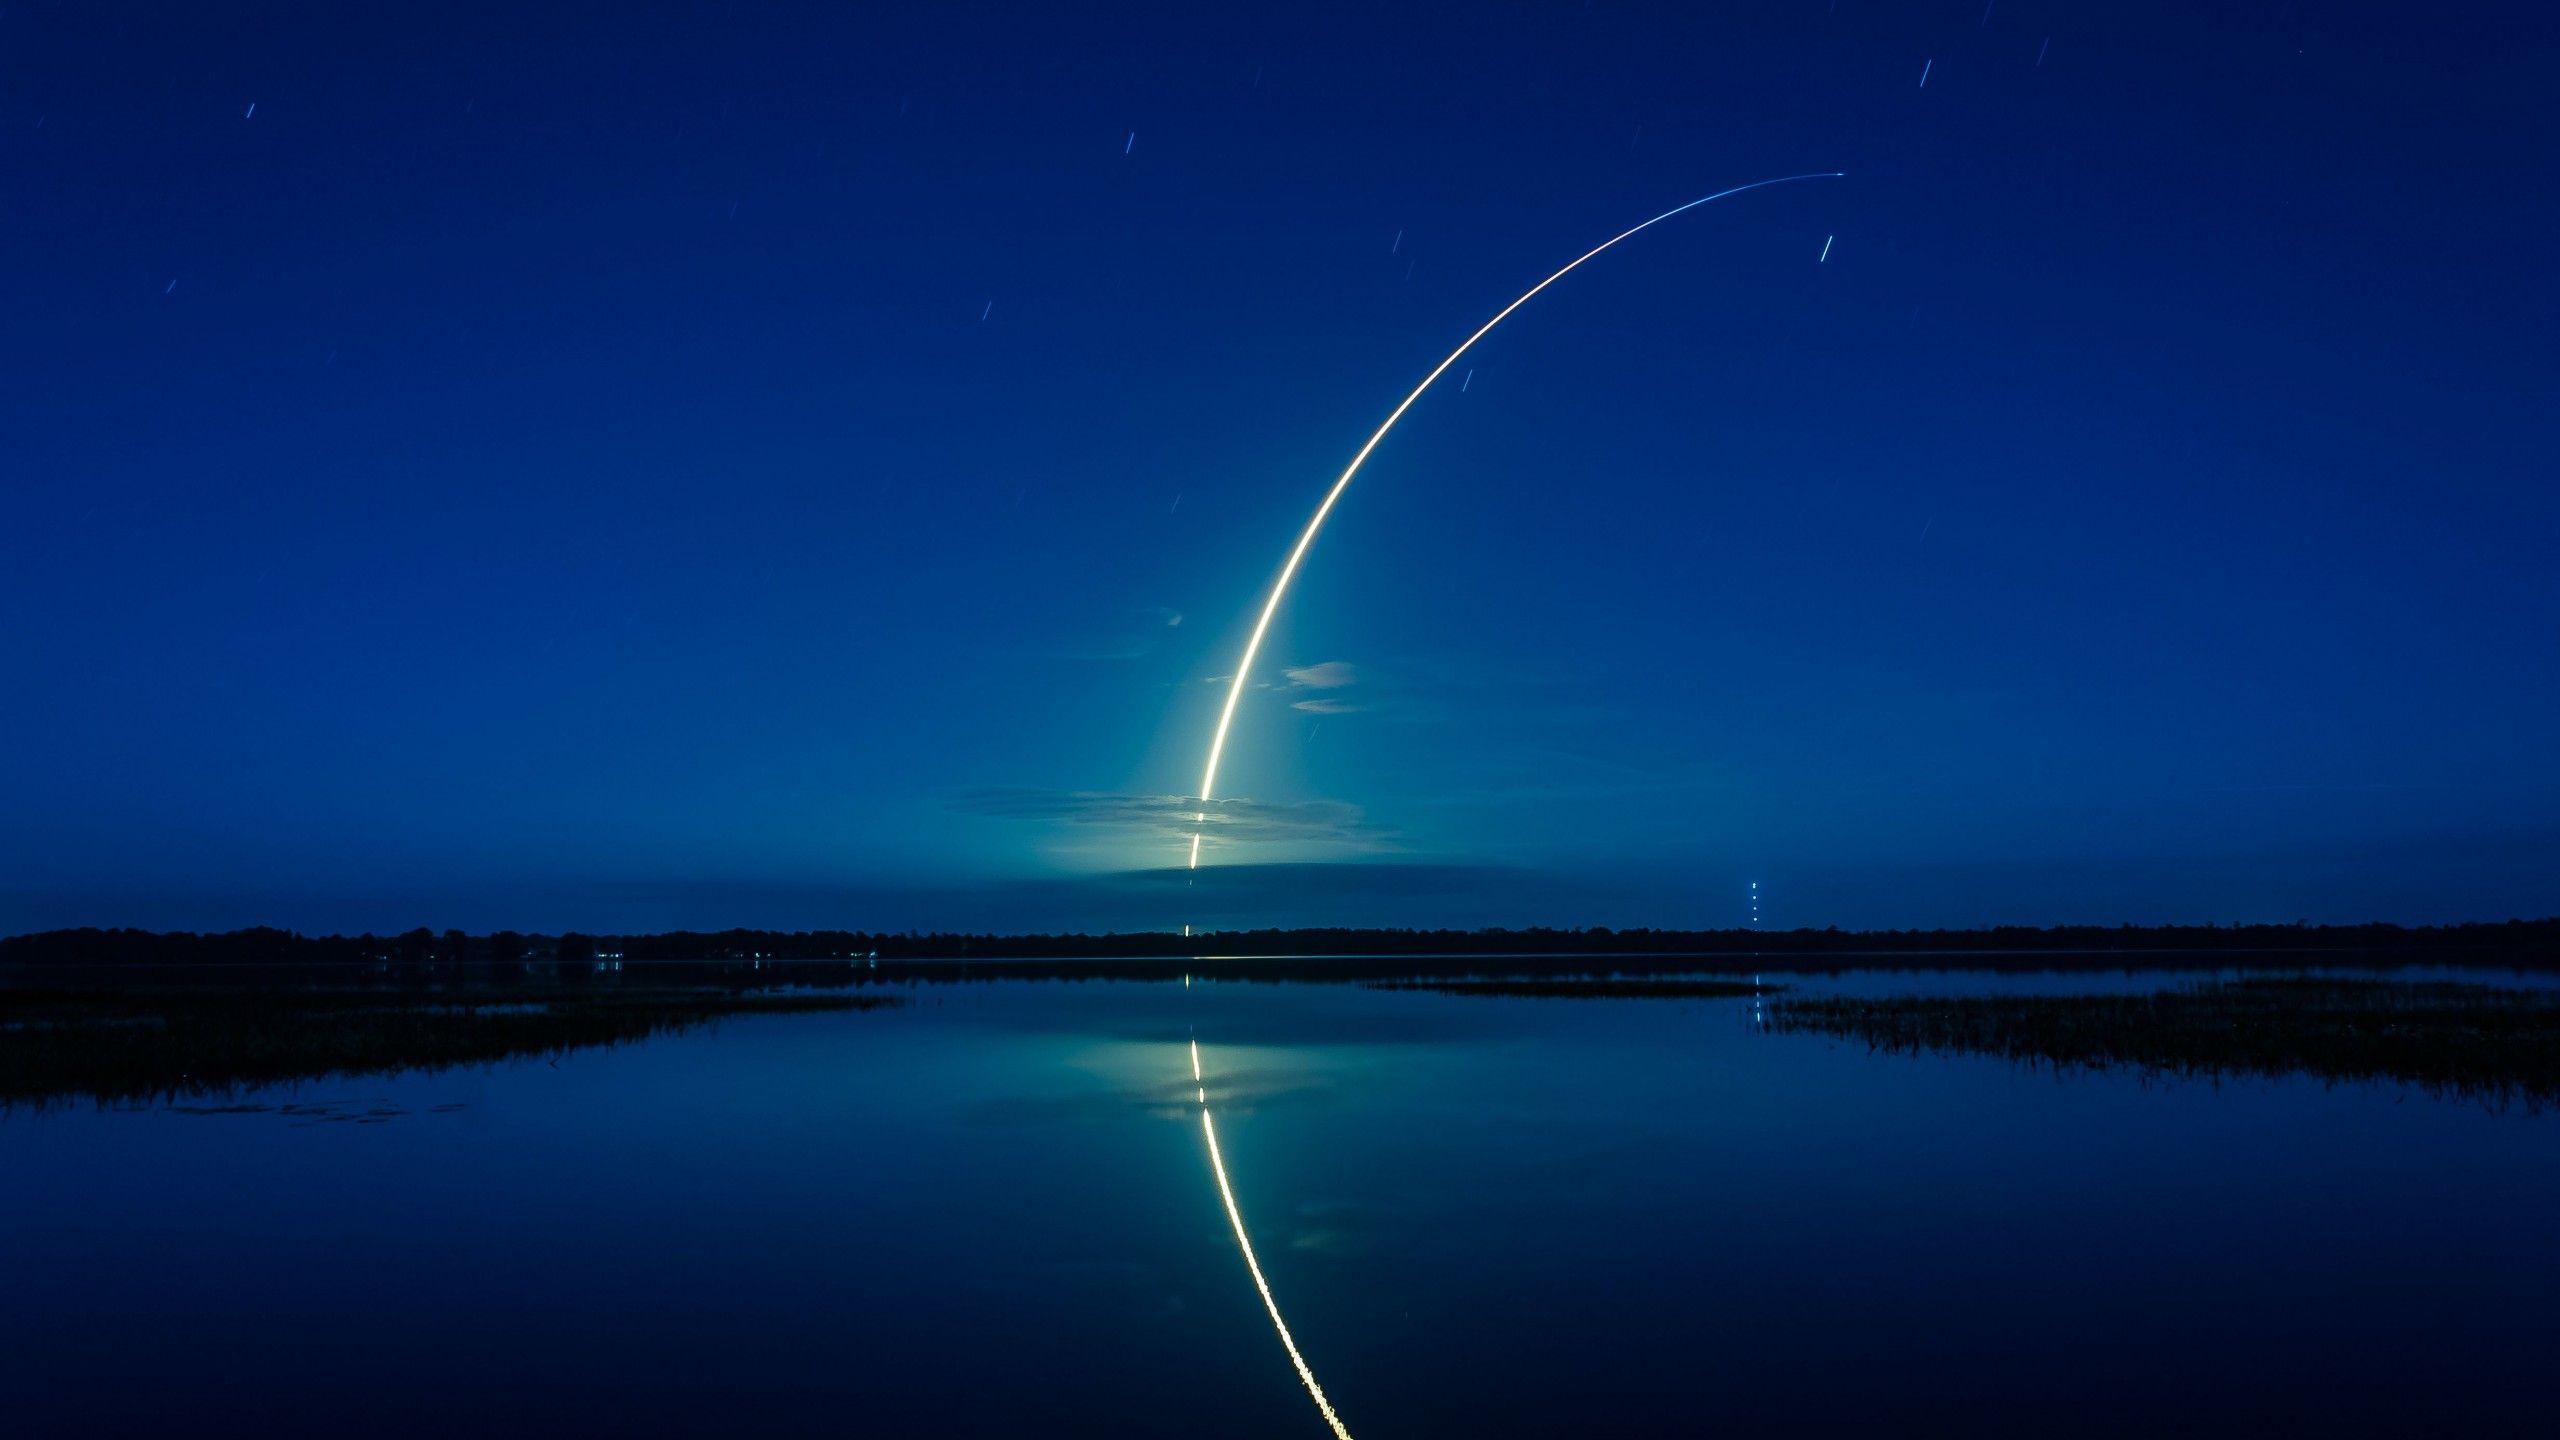 Wallpaper Falcon 9 rocket, SpaceX, Cape Canaveral, 4K, Space,. Wallpaper for iPhone, Android, Mobile and Desktop